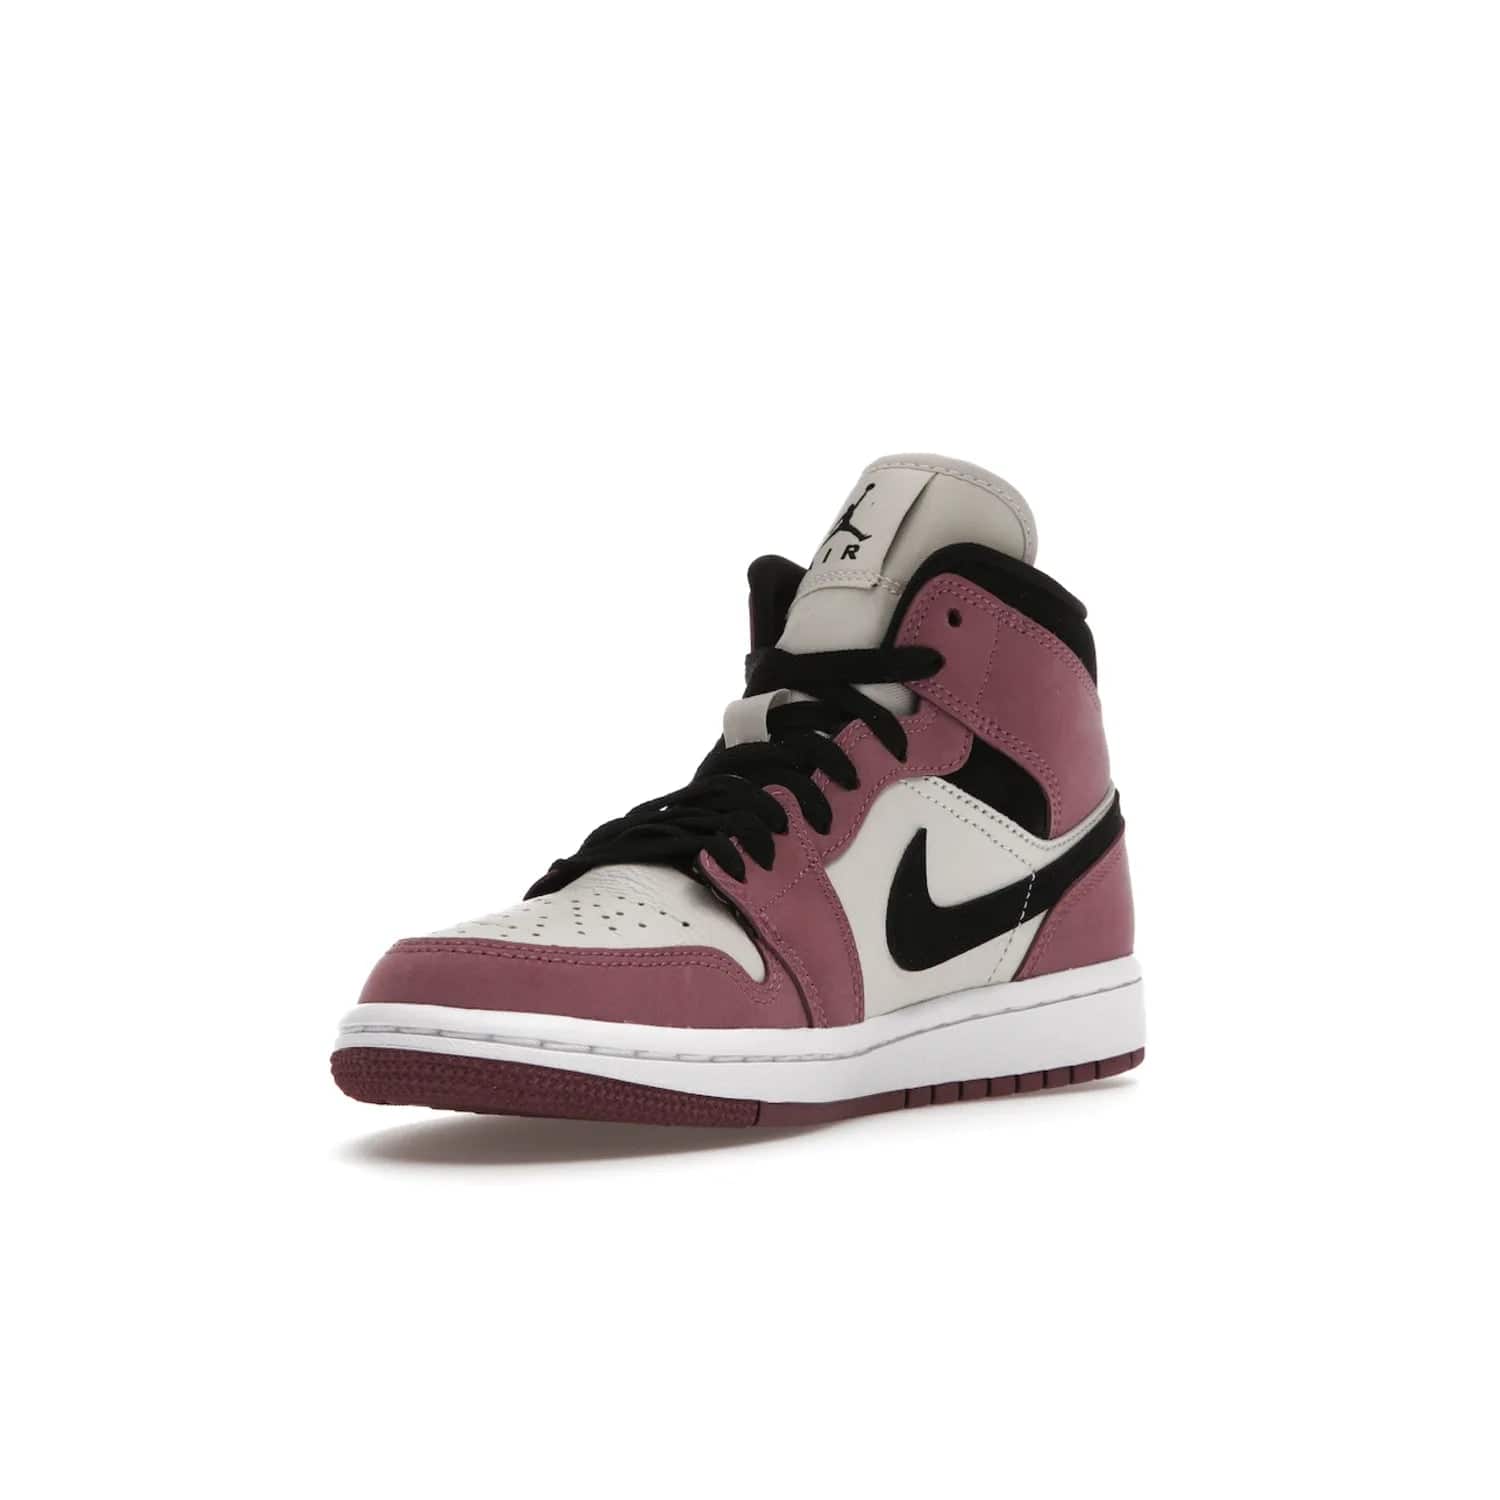 Jordan 1 Mid SE Light Mulberry (Women's) - Image 14 - Only at www.BallersClubKickz.com - Classic style meets performance with the Air Jordan 1 Mid Light Mulberry (Women's). Sleek leather overlays and light bone detailing bring out the best of this classic sneaker, perfect for the active woman on-the-go. Available March 2022.